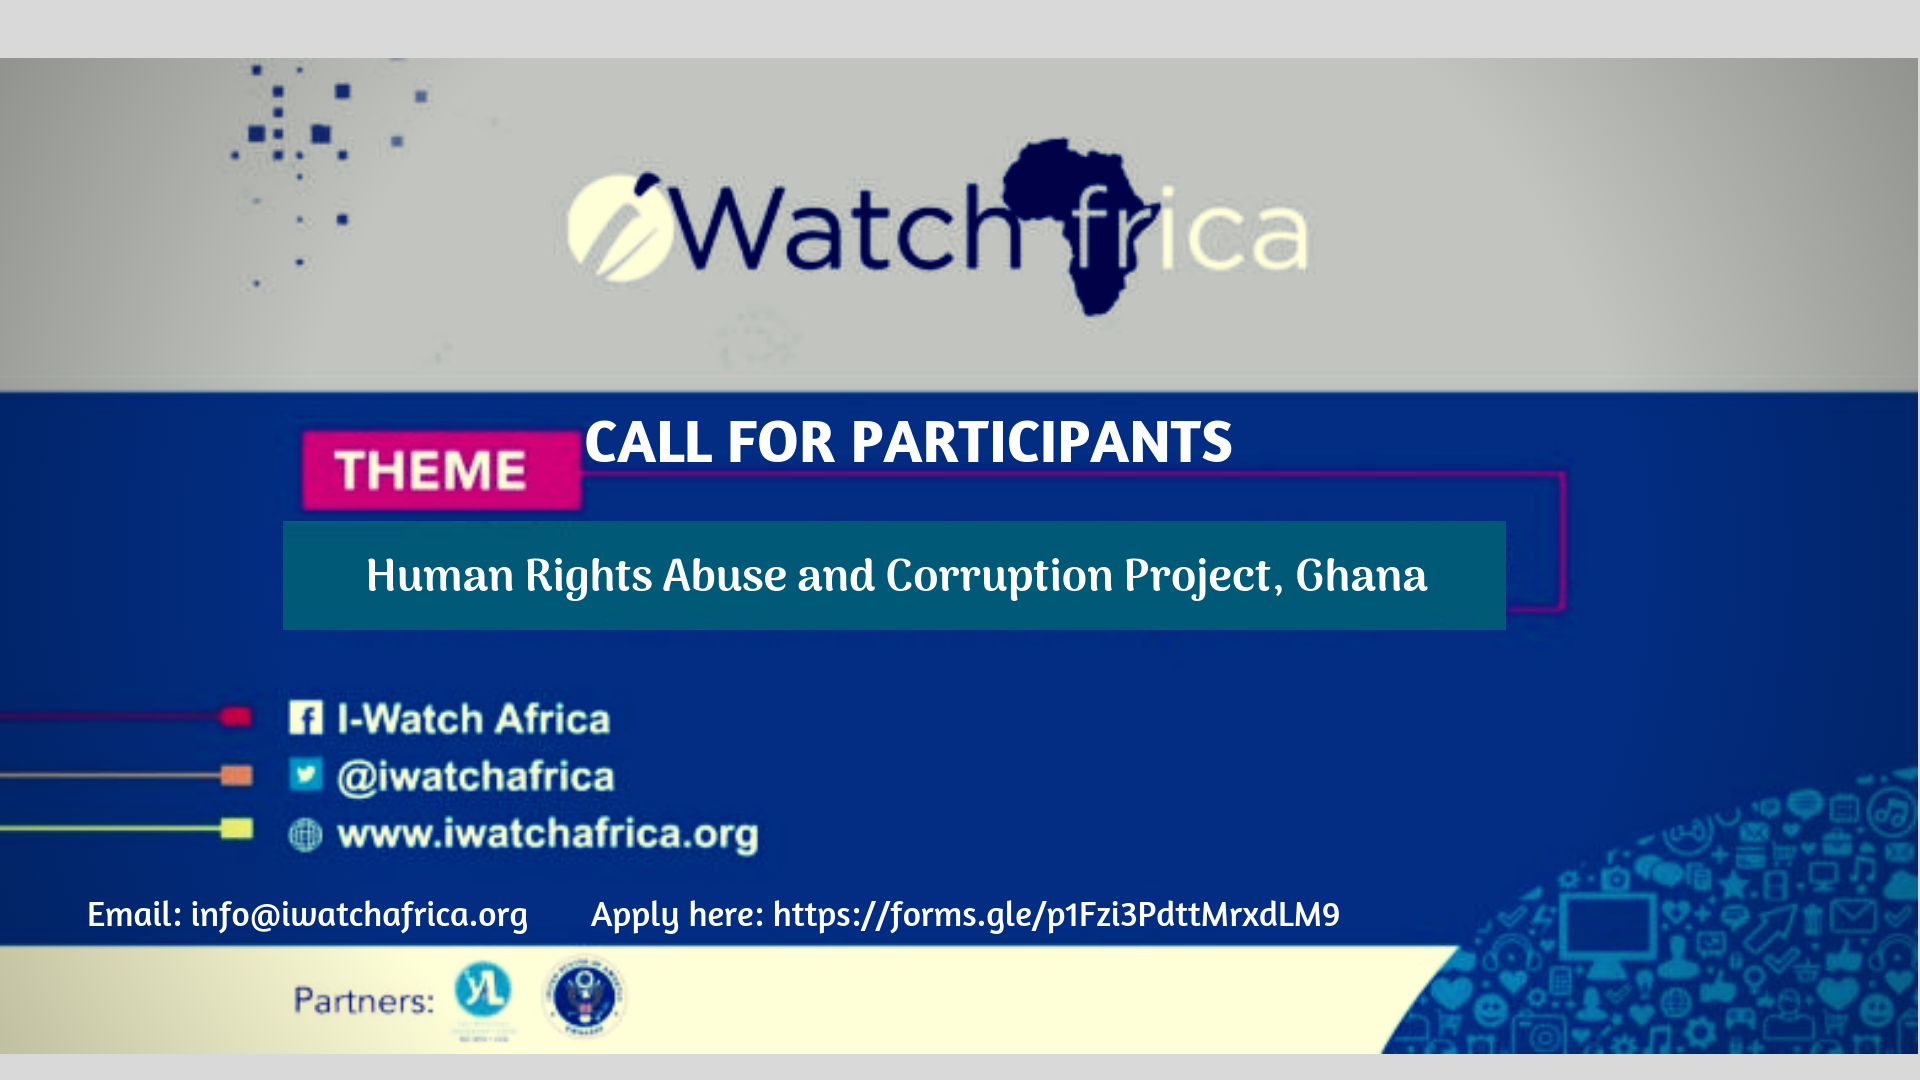 iWatch Africa call for participants